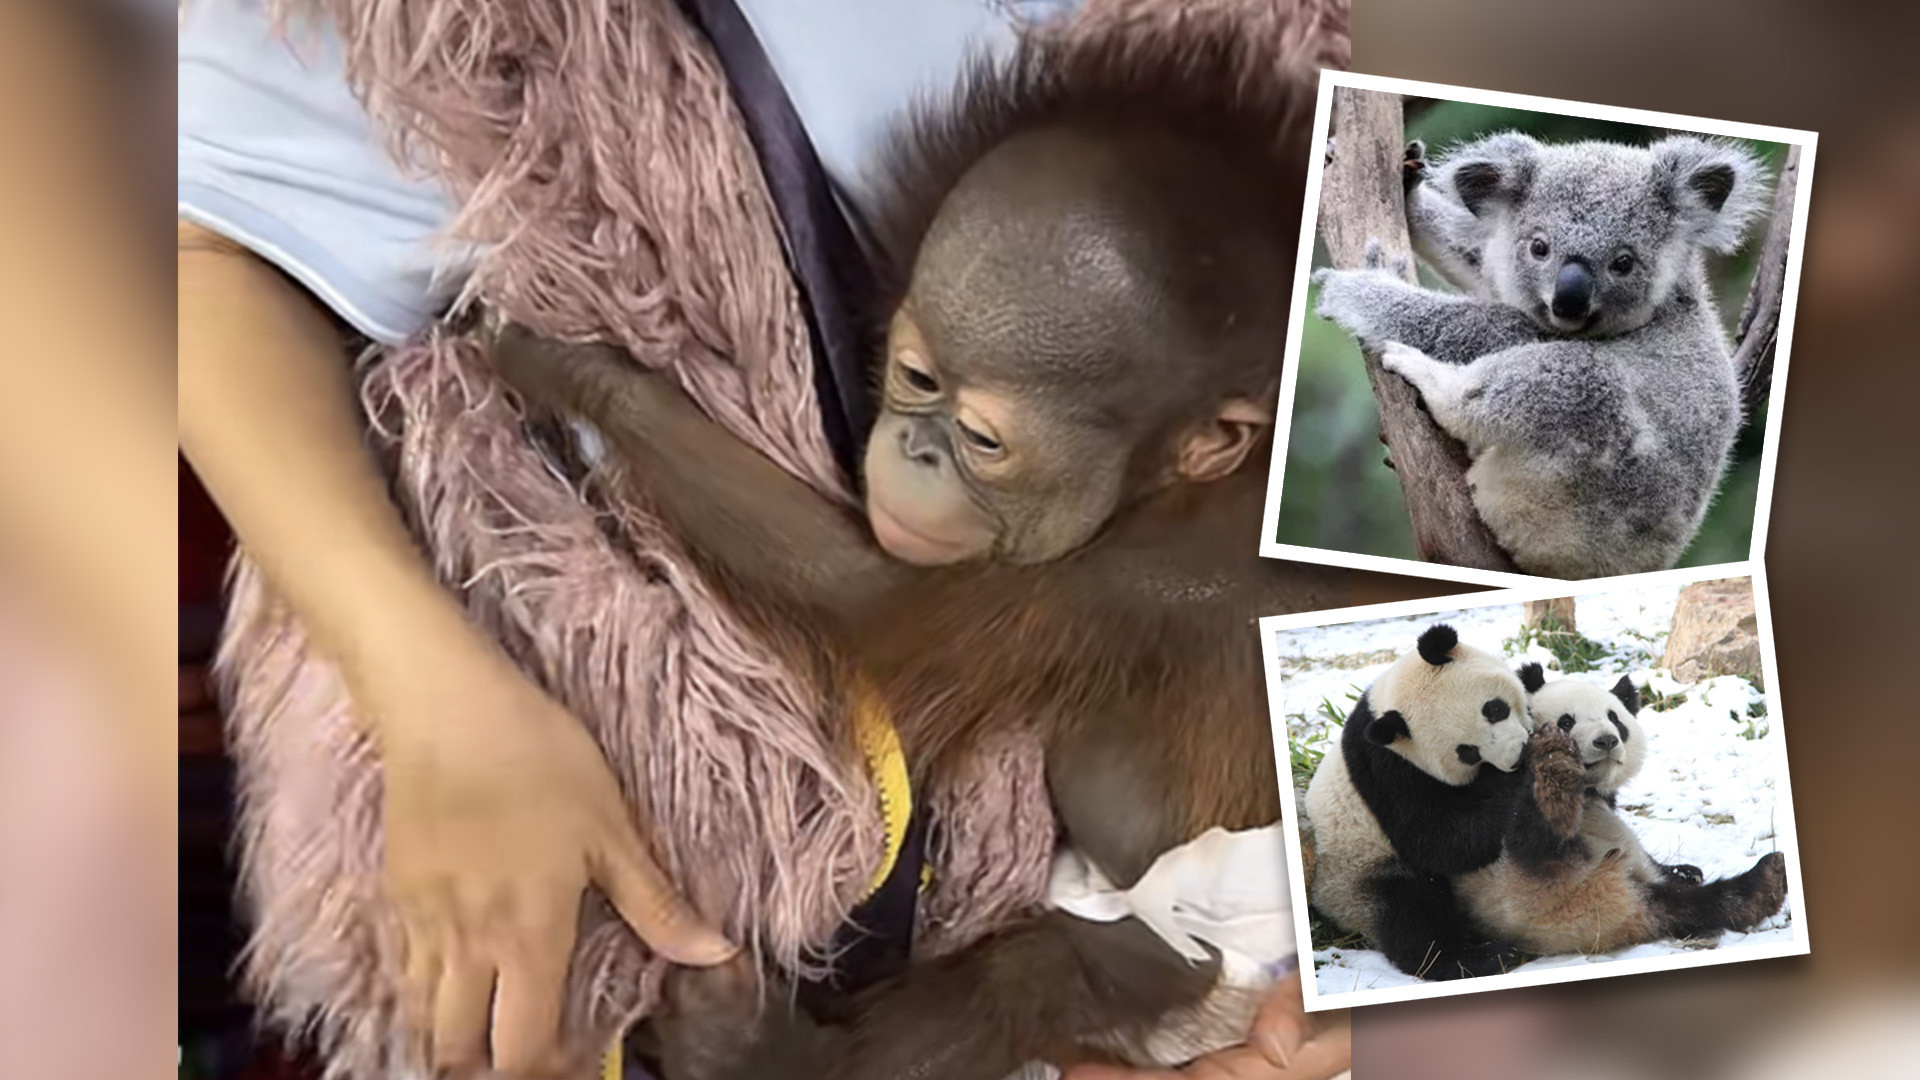 China’s zero-Covid policy claims unexpected victims, with one private zoo in the country’s east turning to live streams and animal adoptions to stay afloat. Photo: SCMP composite/Hongshan Forest Zoo